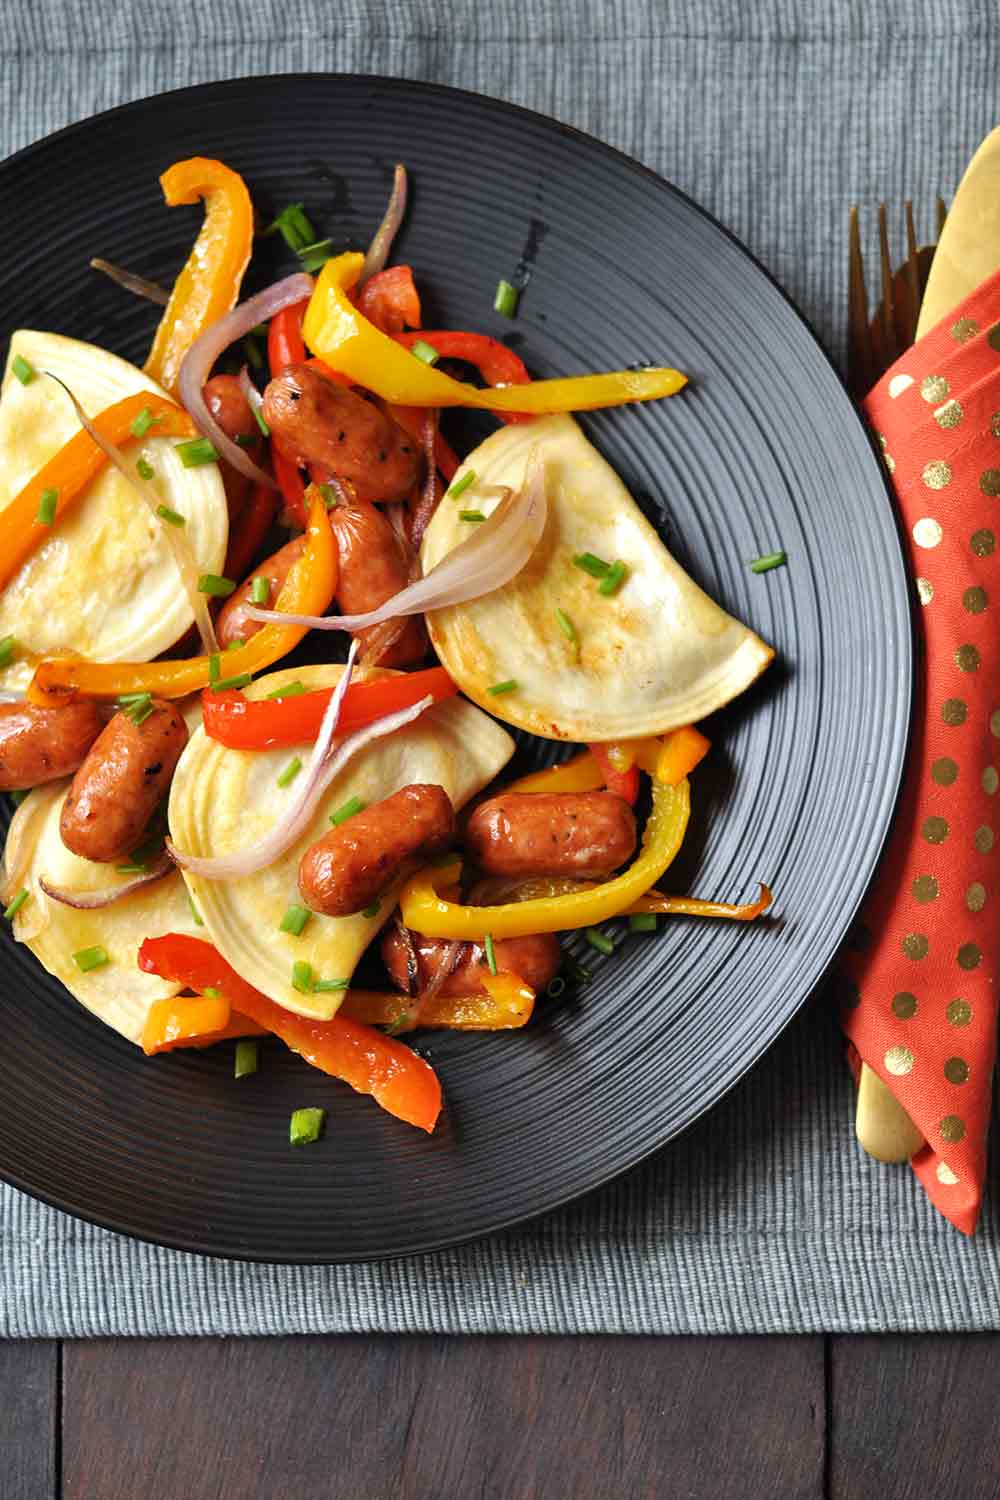 Pierogies and Kielbasa with Peppers and Onions